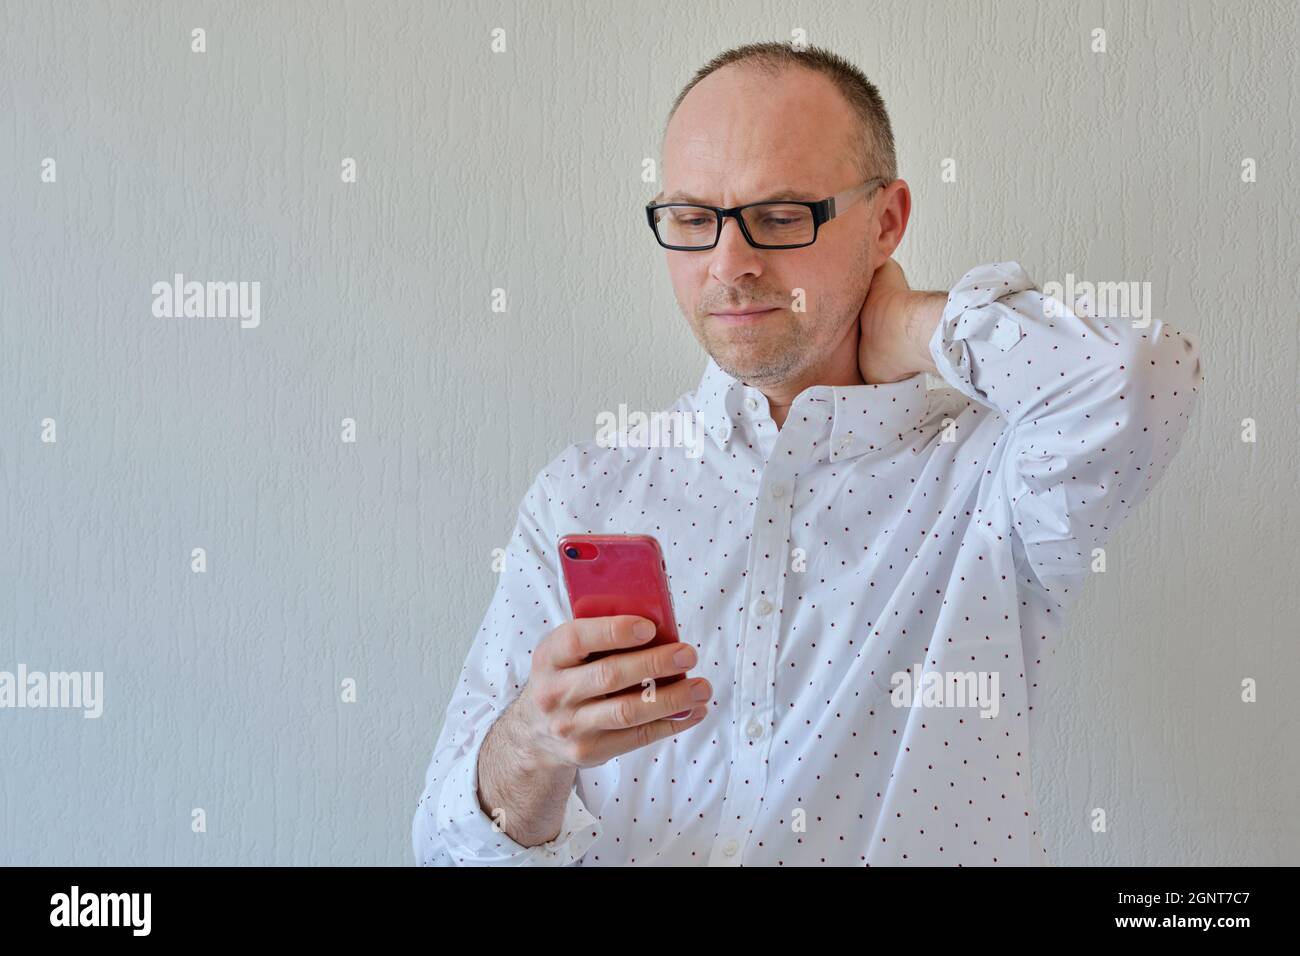 Half-length view a man with a smartphone. White background with space for text or annotations. Handsome man looks at his phone. Stock Photo